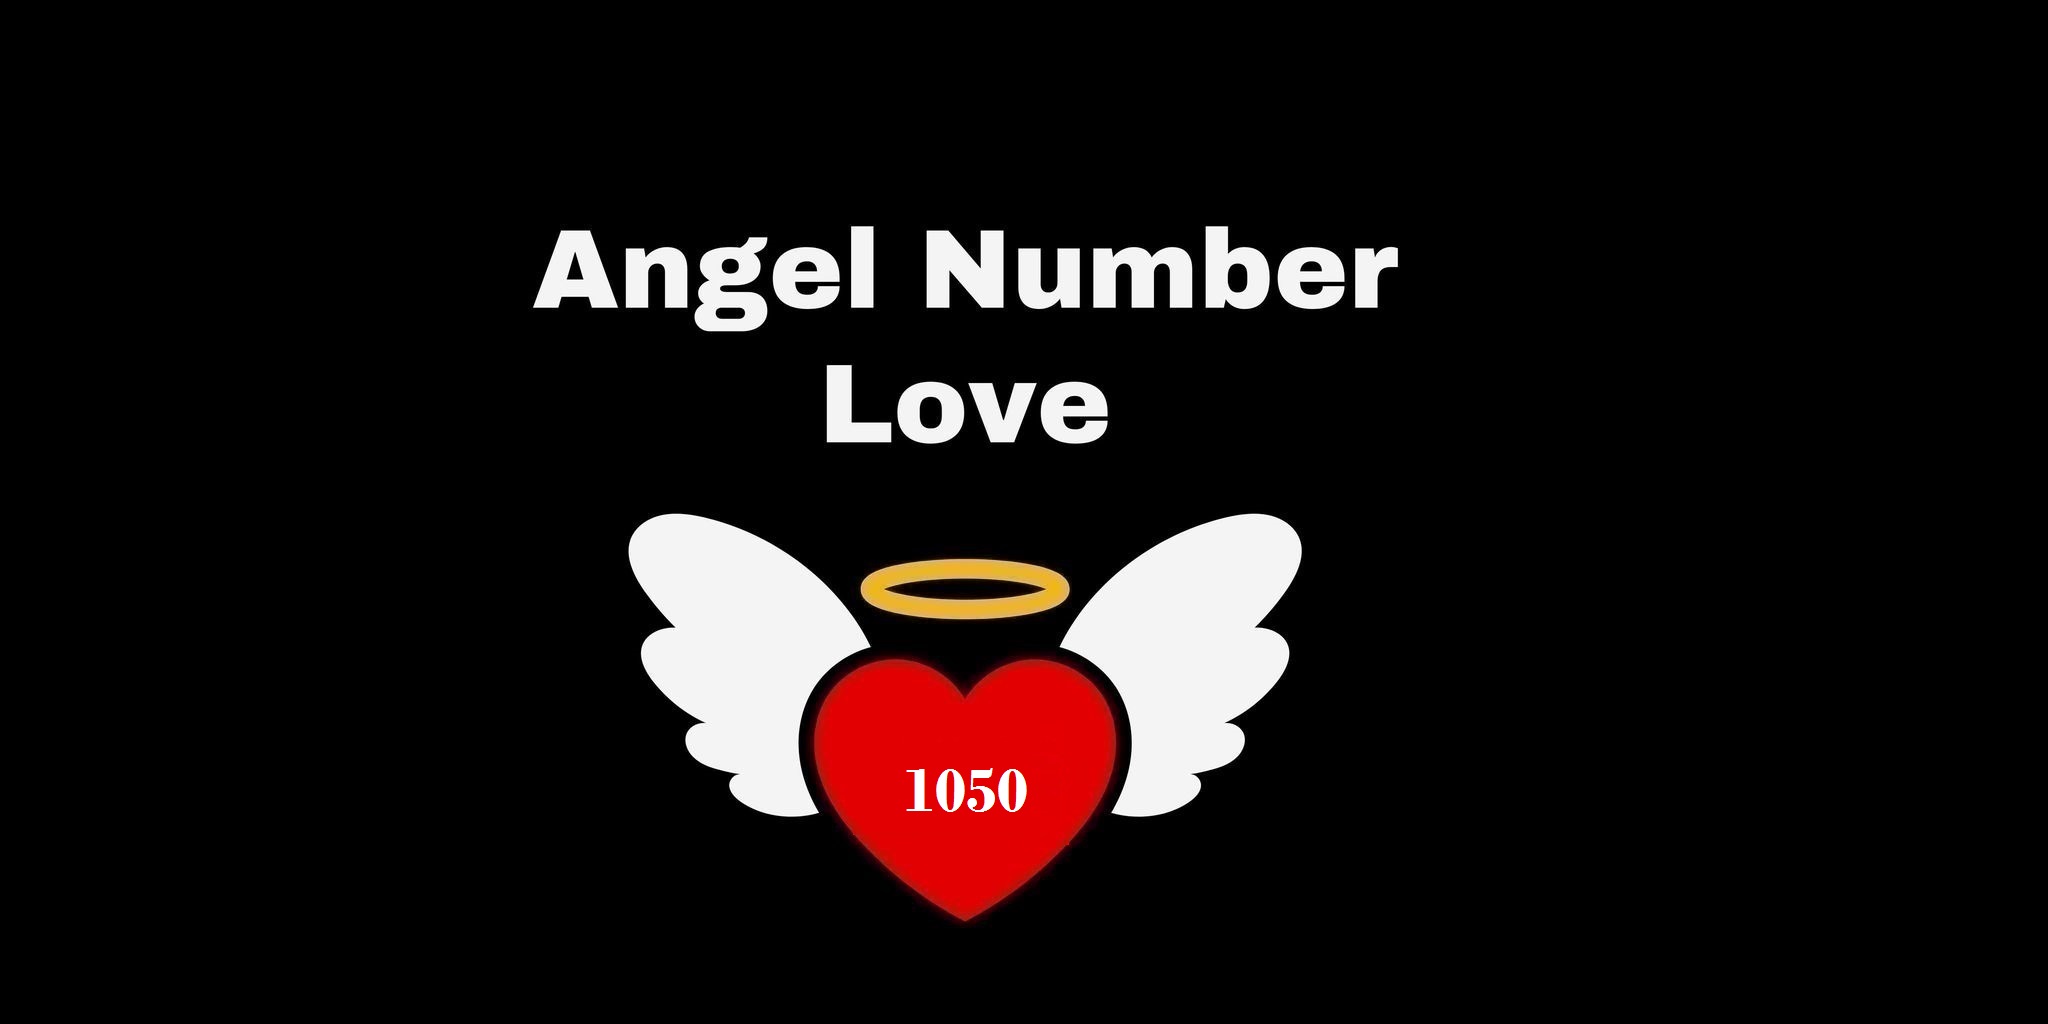 1050 Angel Number Meaning In Love